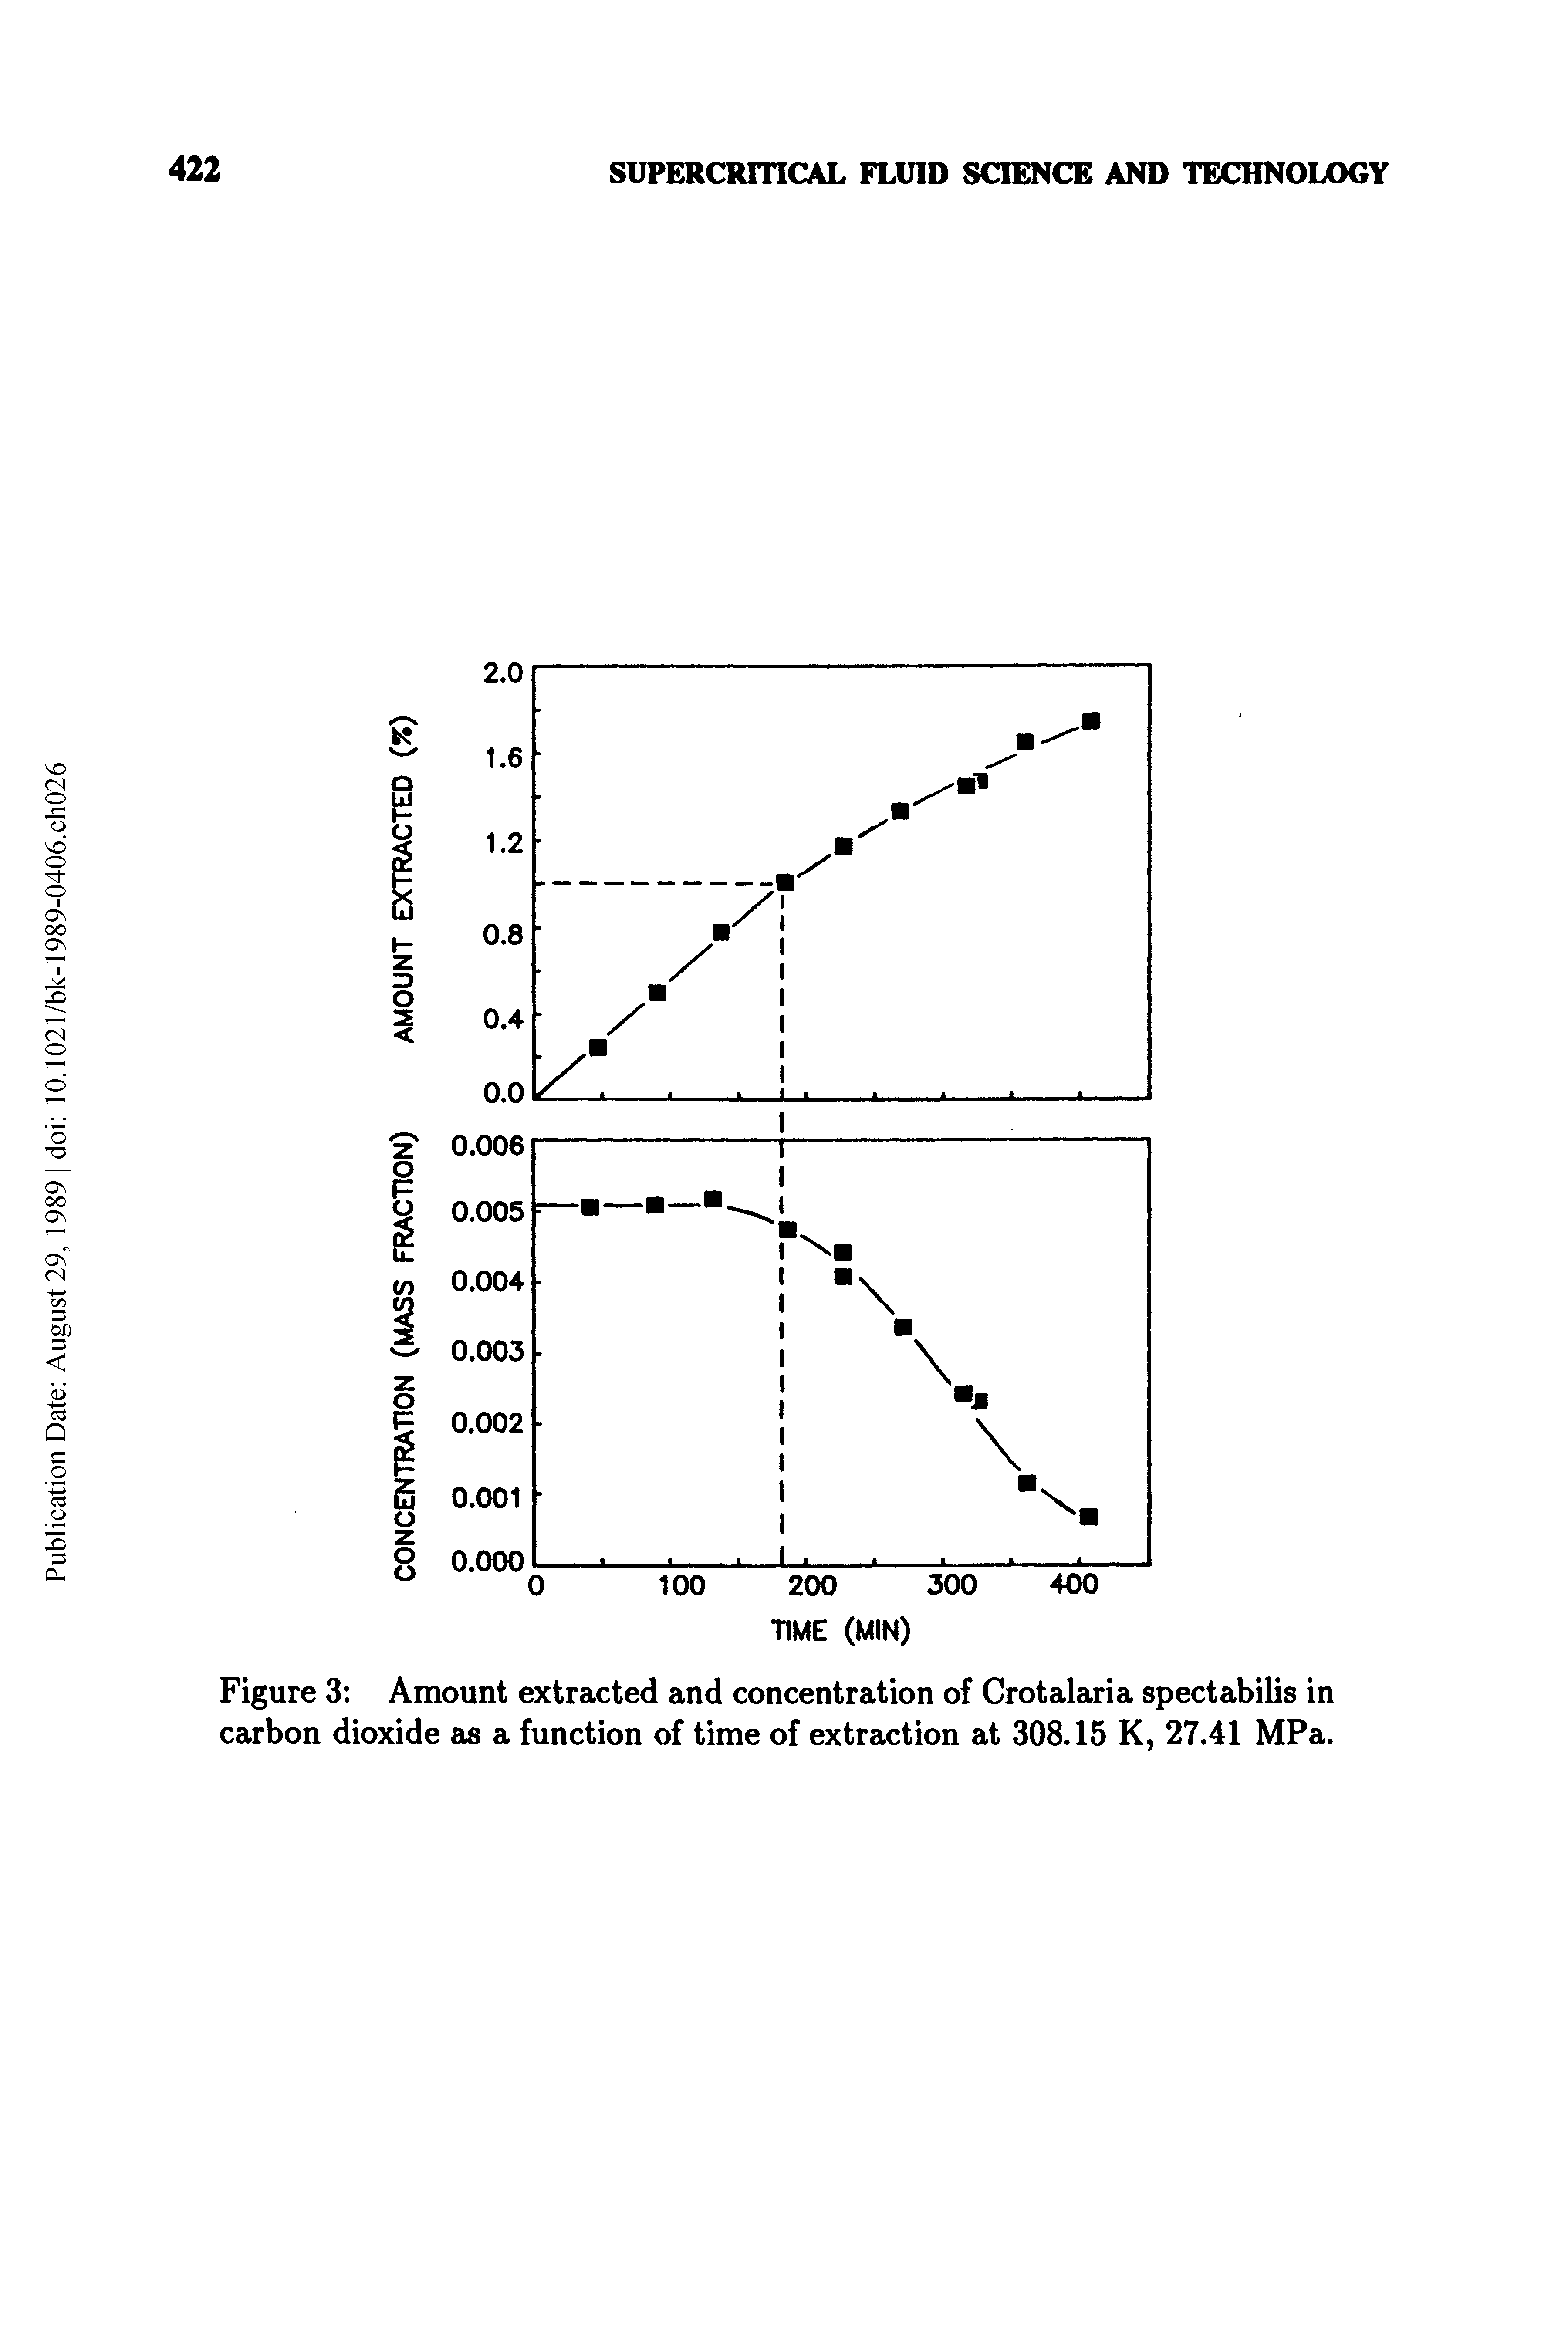 Figure 3 Amount extracted and concentration of Crotalaria spectabilis in carbon dioxide as a function of time of extraction at 308.15 K, 27.41 MPa.